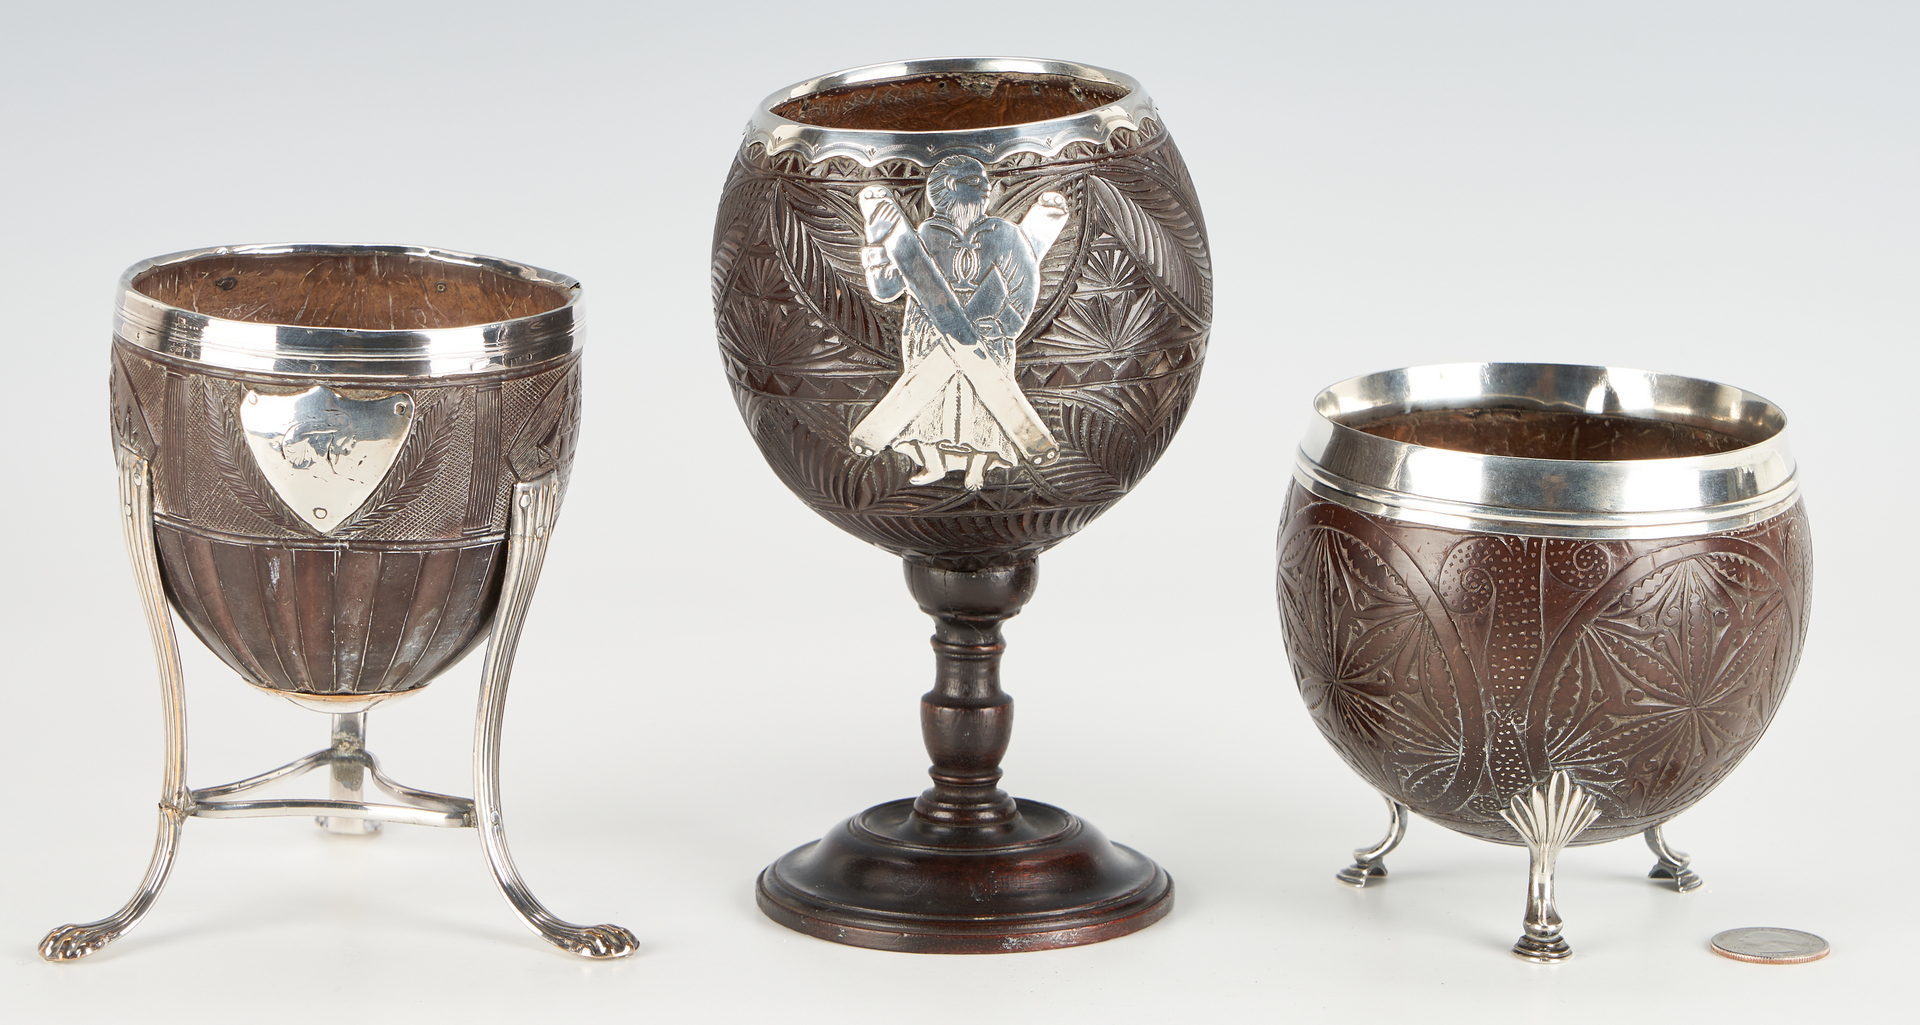 Lot 79: 3 European Silver Mounted Coconut Cups